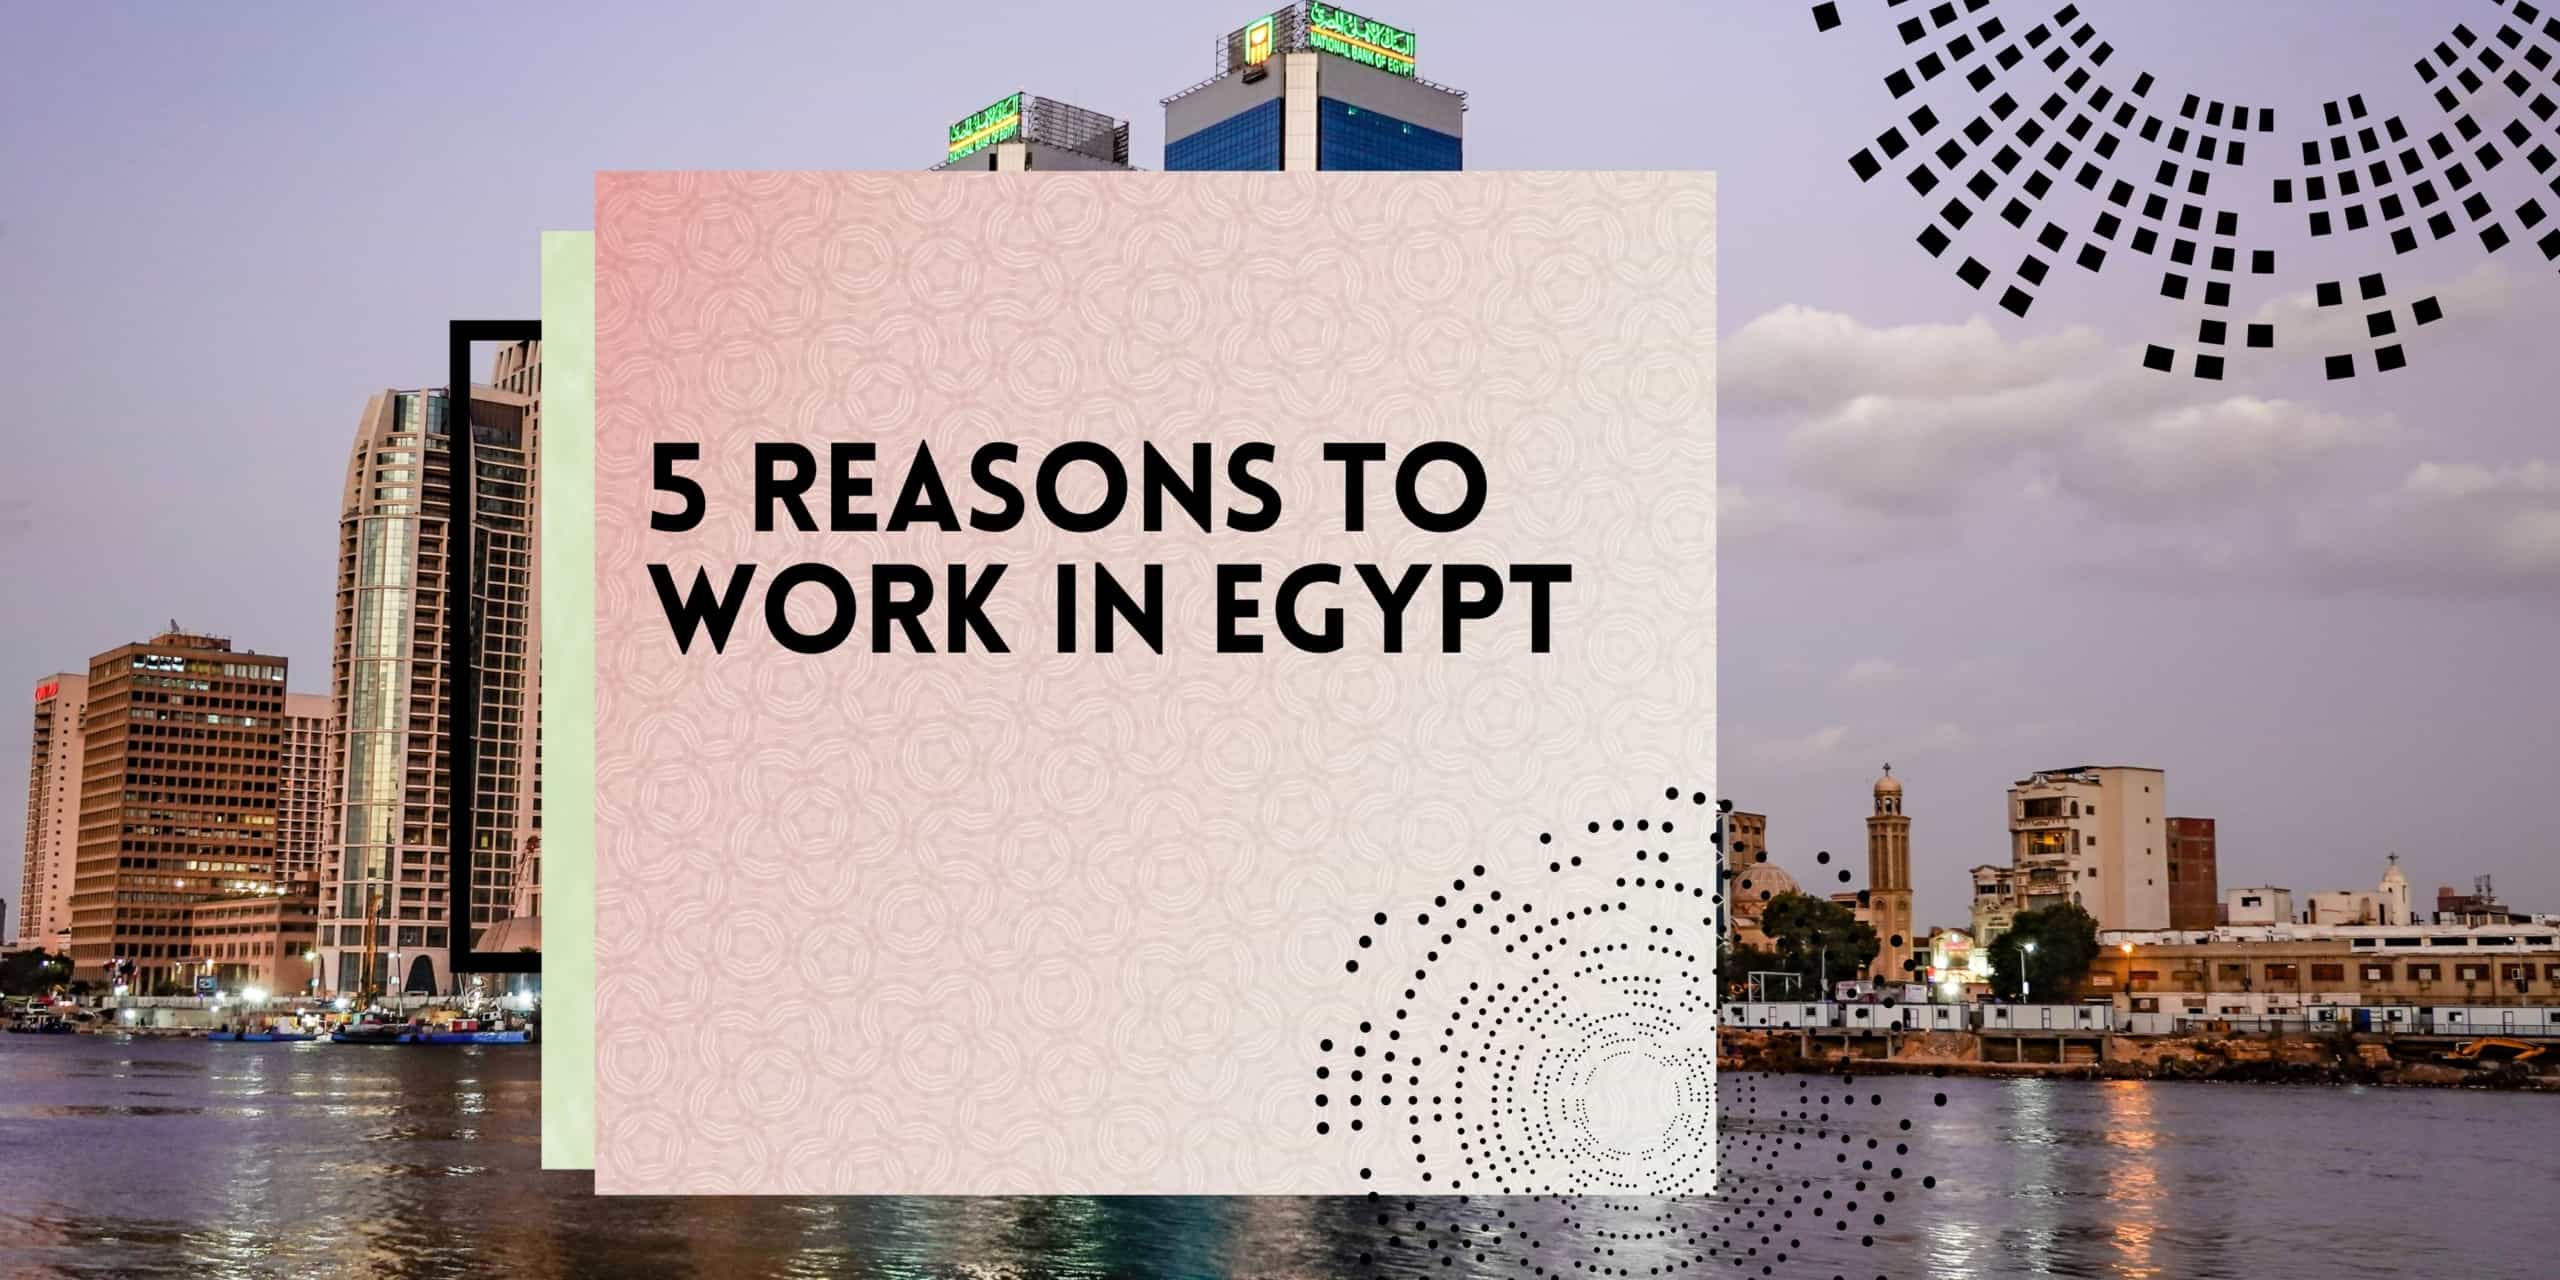 5 Reasons to Work in Egypt